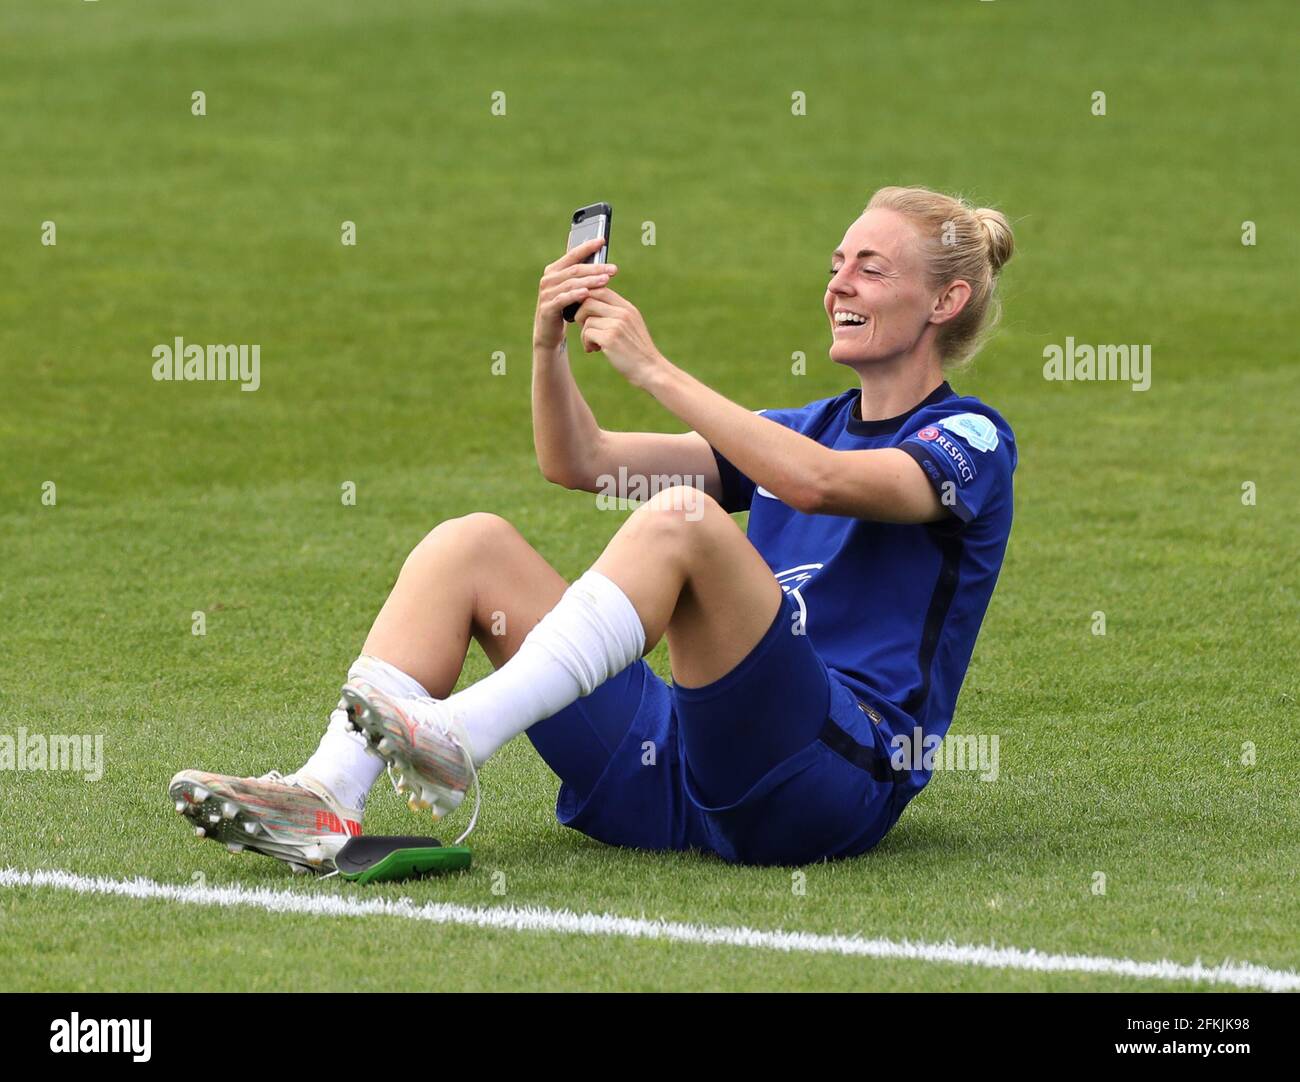 Kington Upon Thames, England, 2nd May 2021. Sophie Ingle of Chelsea rings someone to tell them they are through to the Final during the UEFA Women's Champions League match at Kingsmeadow, Kington Upon Thames. Picture credit should read: Paul Terry / Sportimage Credit: Sportimage/Alamy Live News Stock Photo